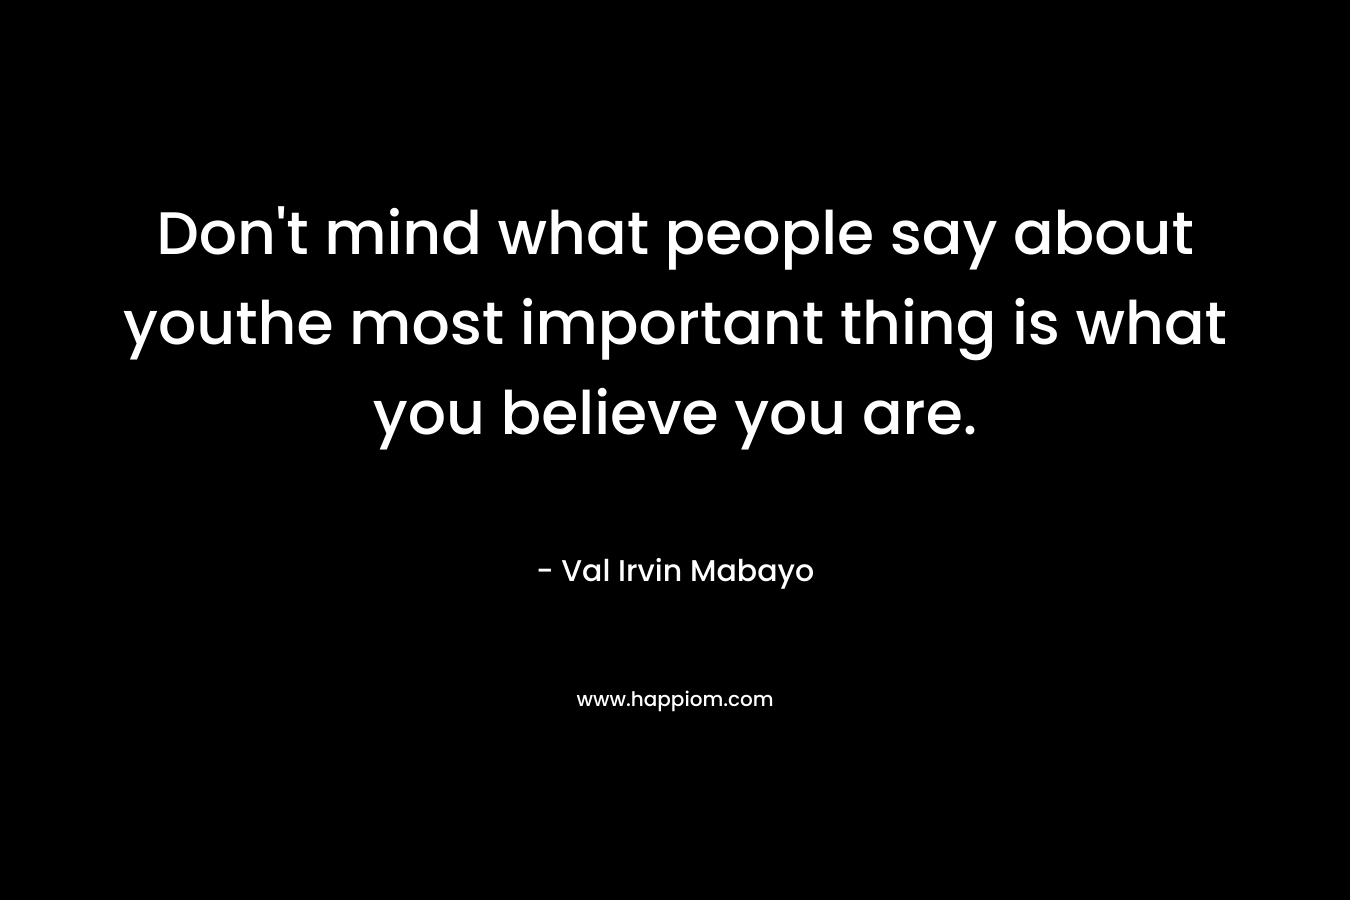 Don't mind what people say about youthe most important thing is what you believe you are.